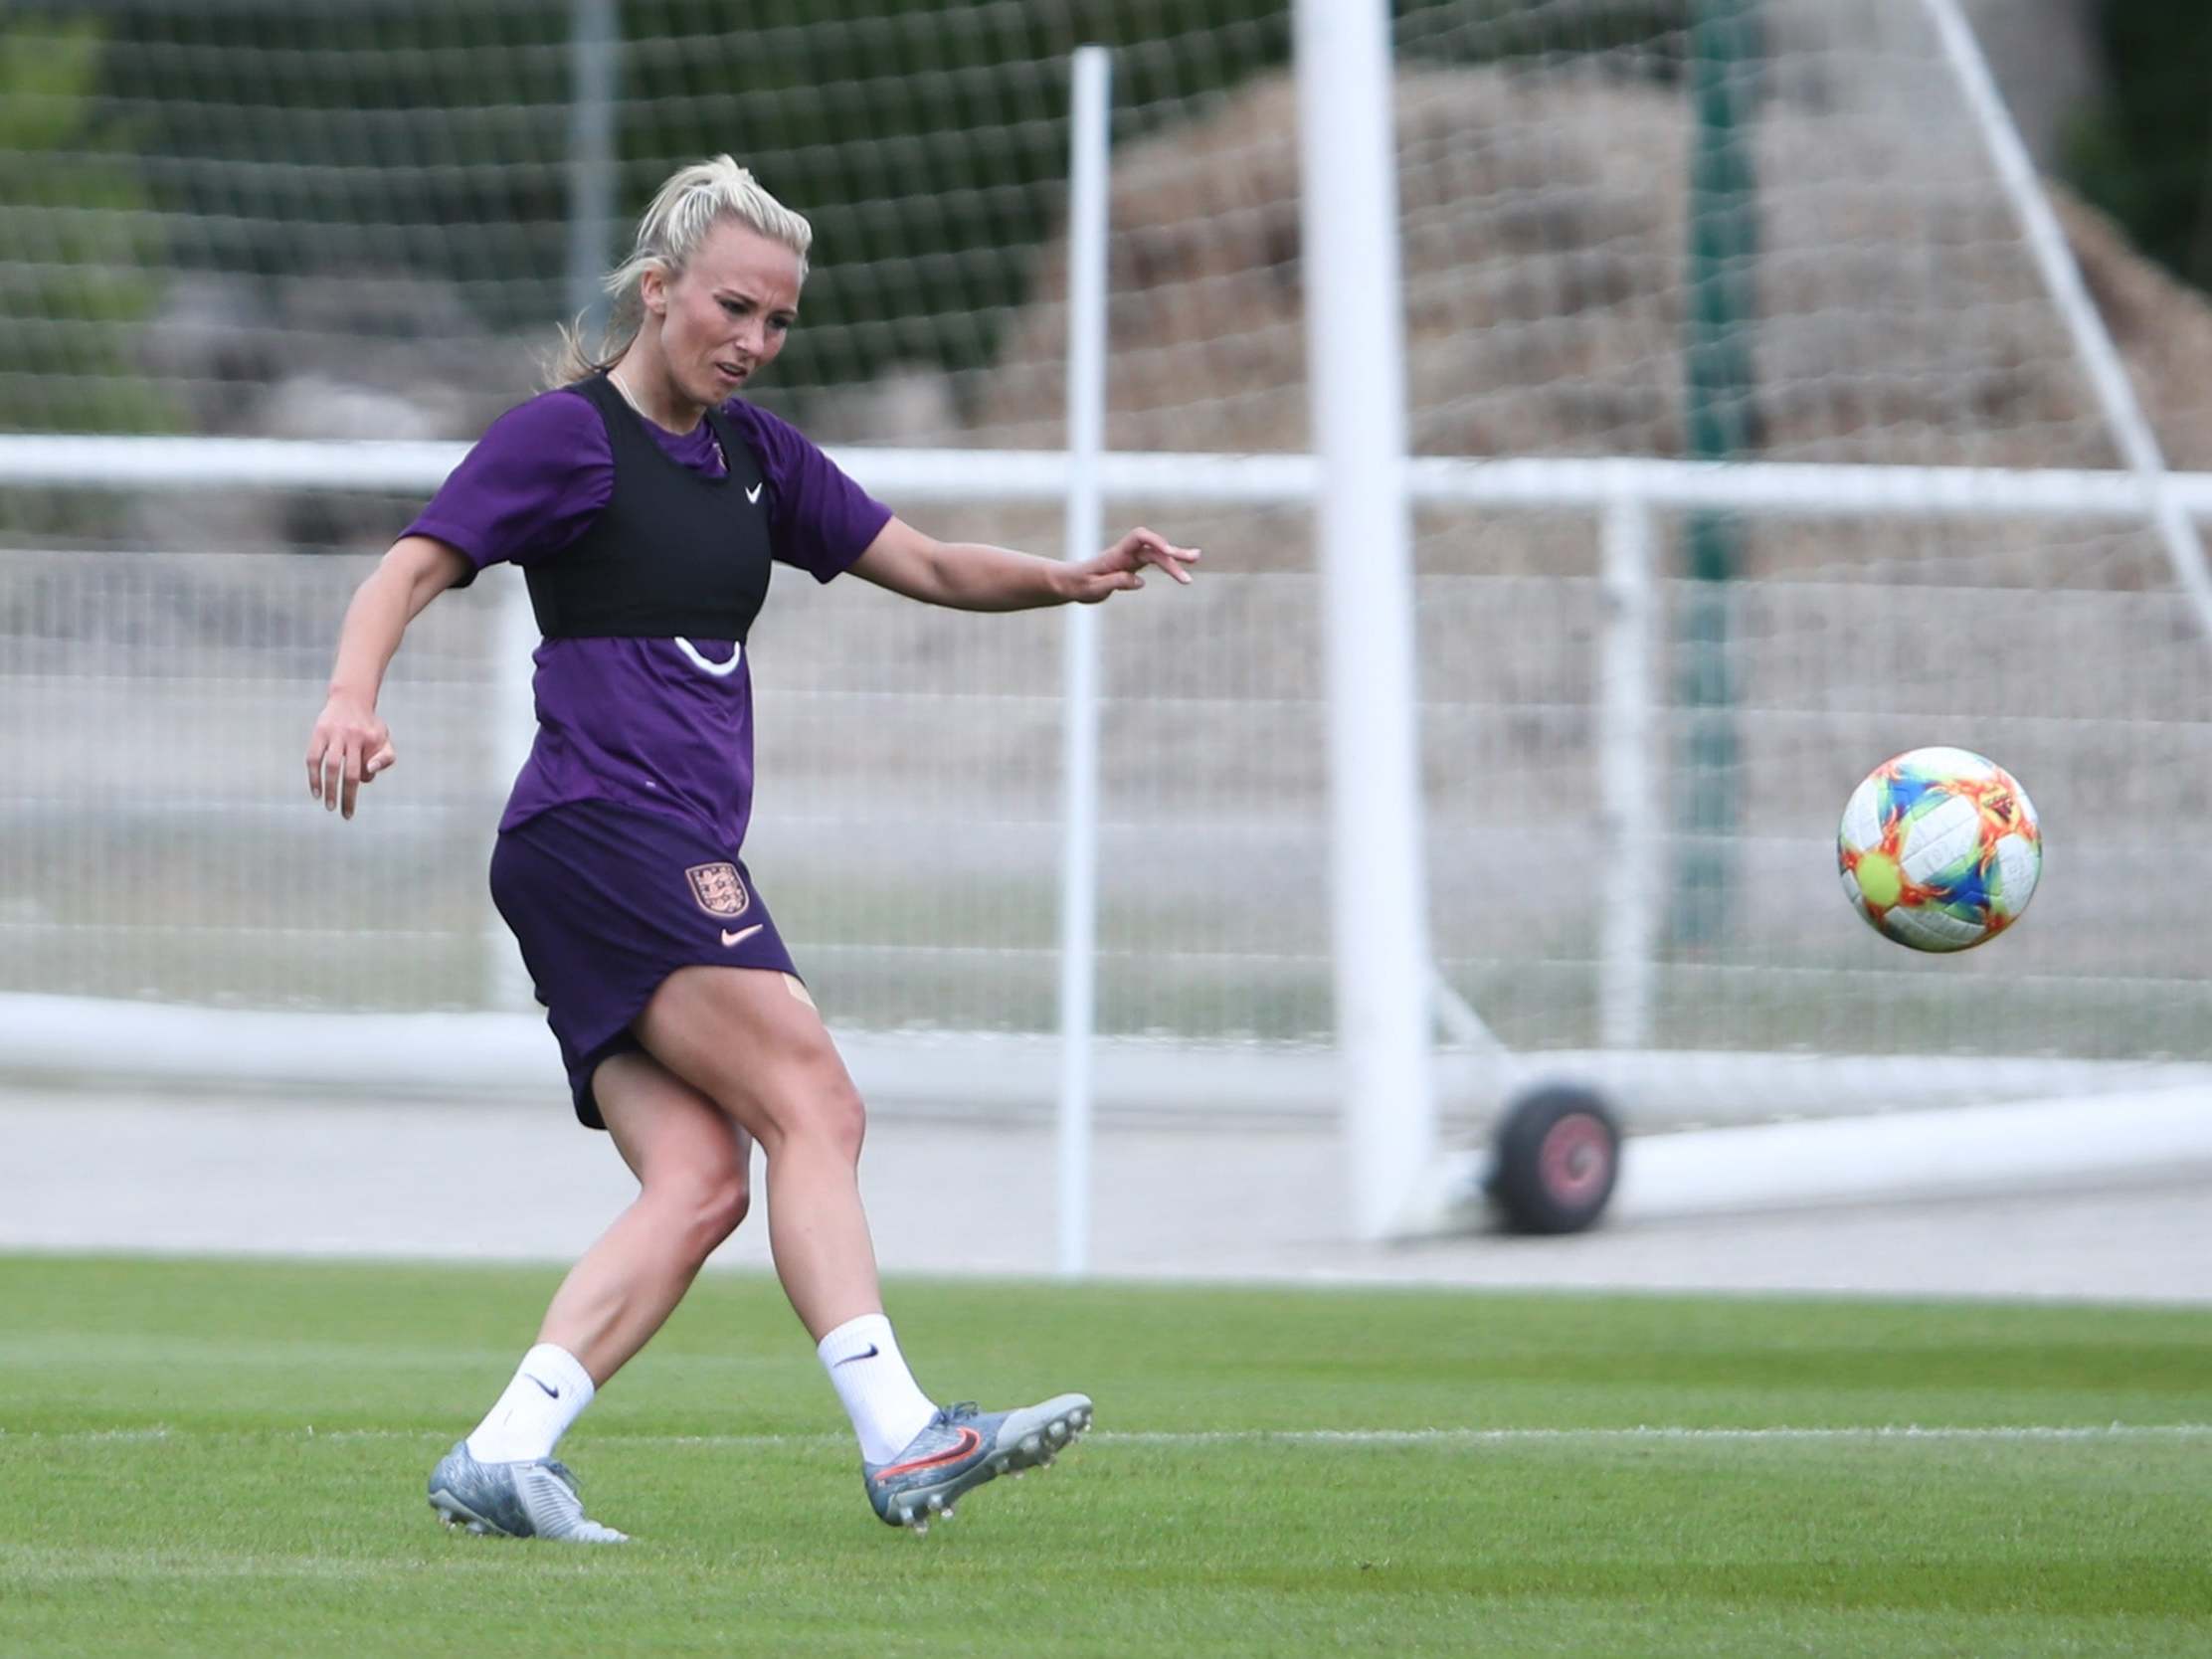 Toni Duggan claims England play it out from the back like Barcelona